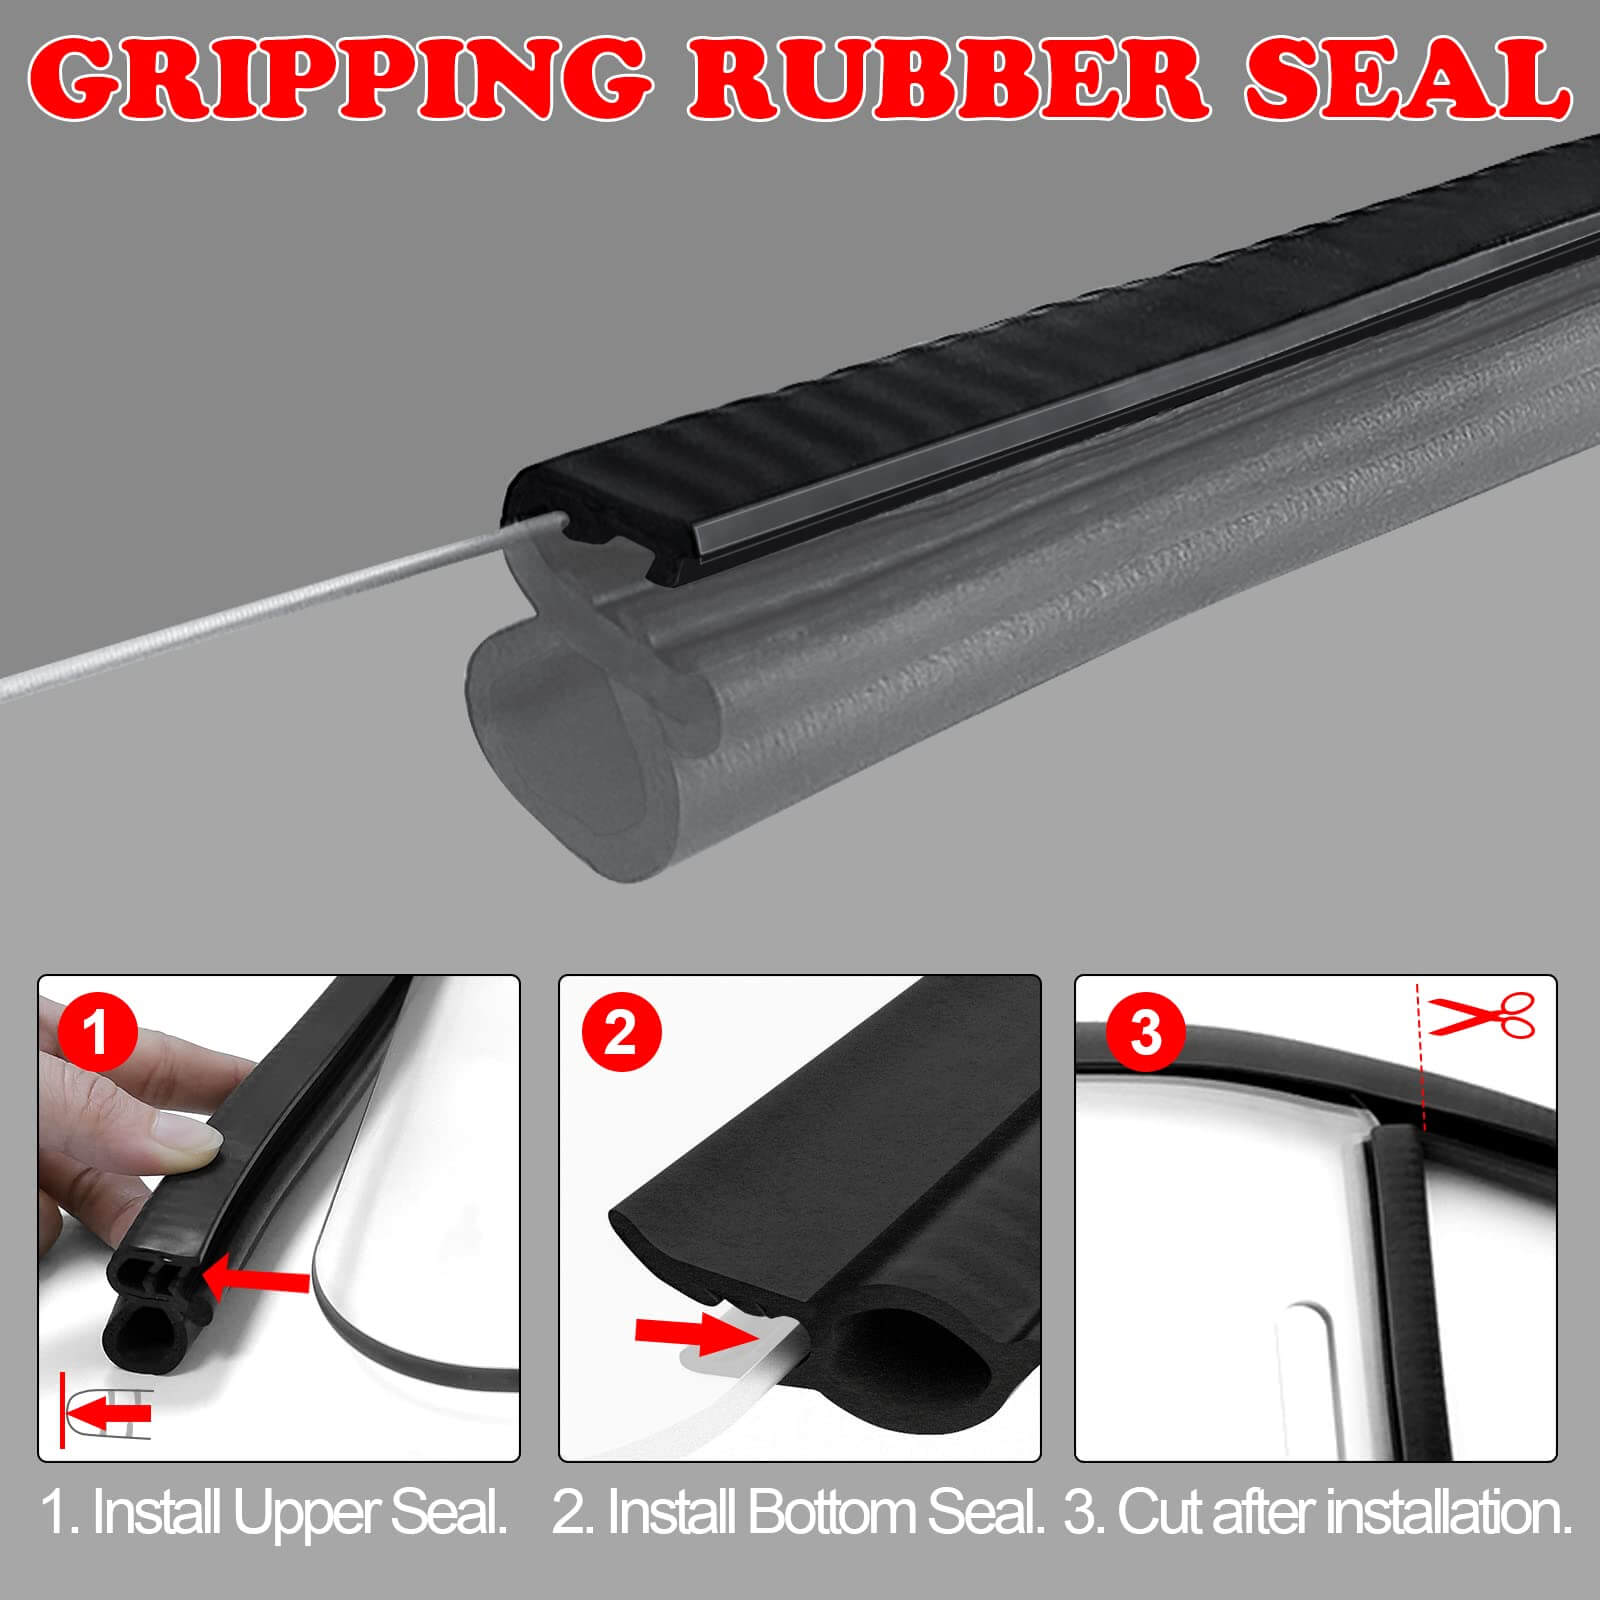 rubber seal steps